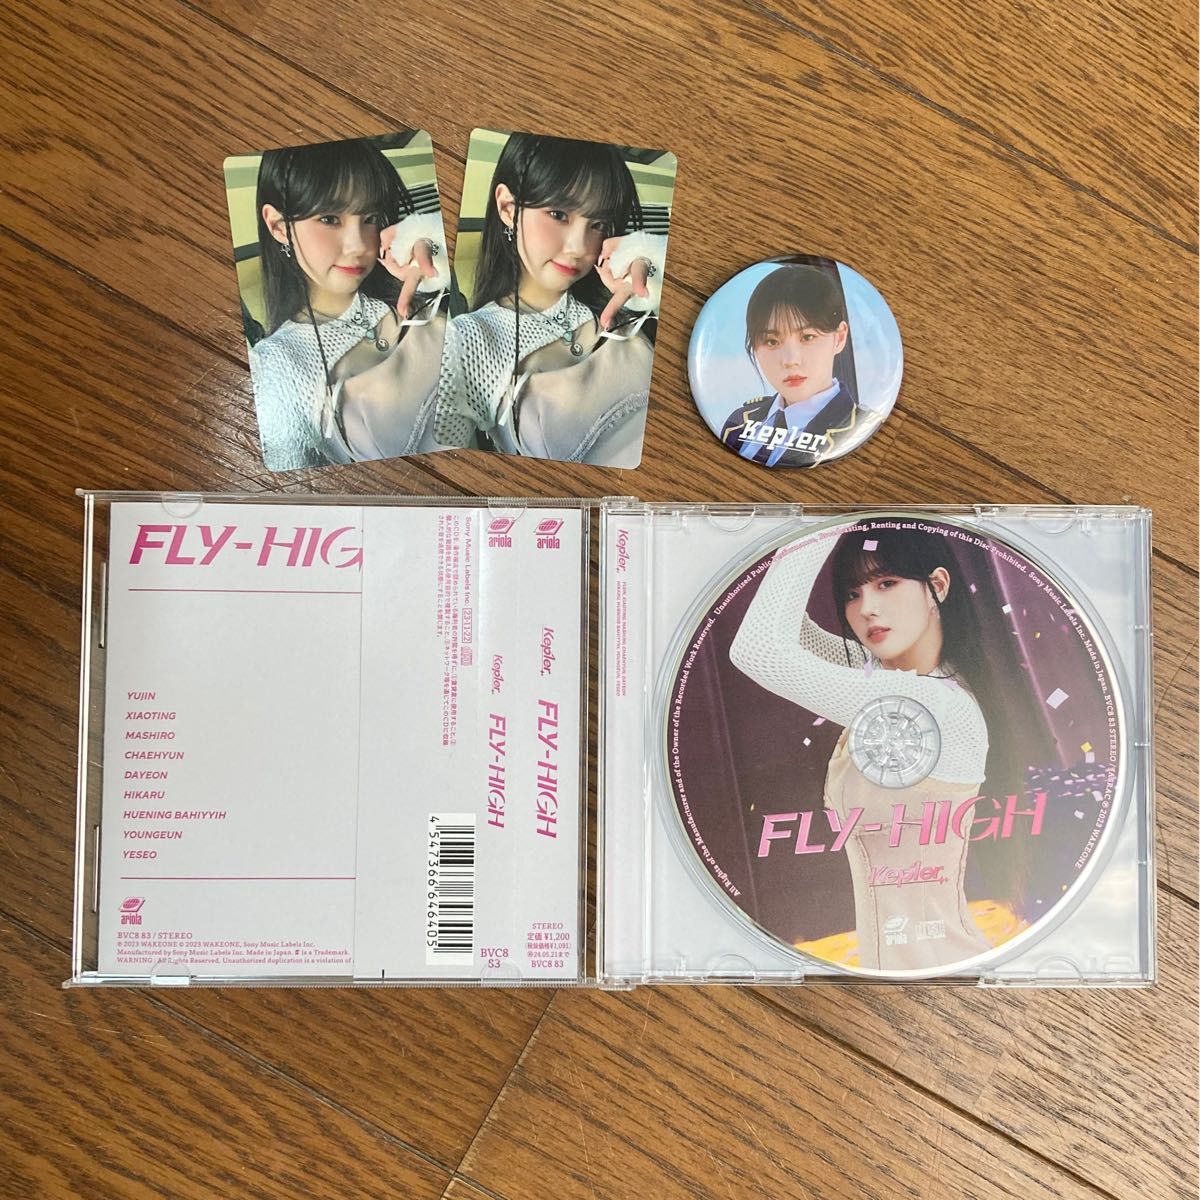 kep1er チェヒョン FLYHIGH 通常盤 CD トレカ 缶バッジ